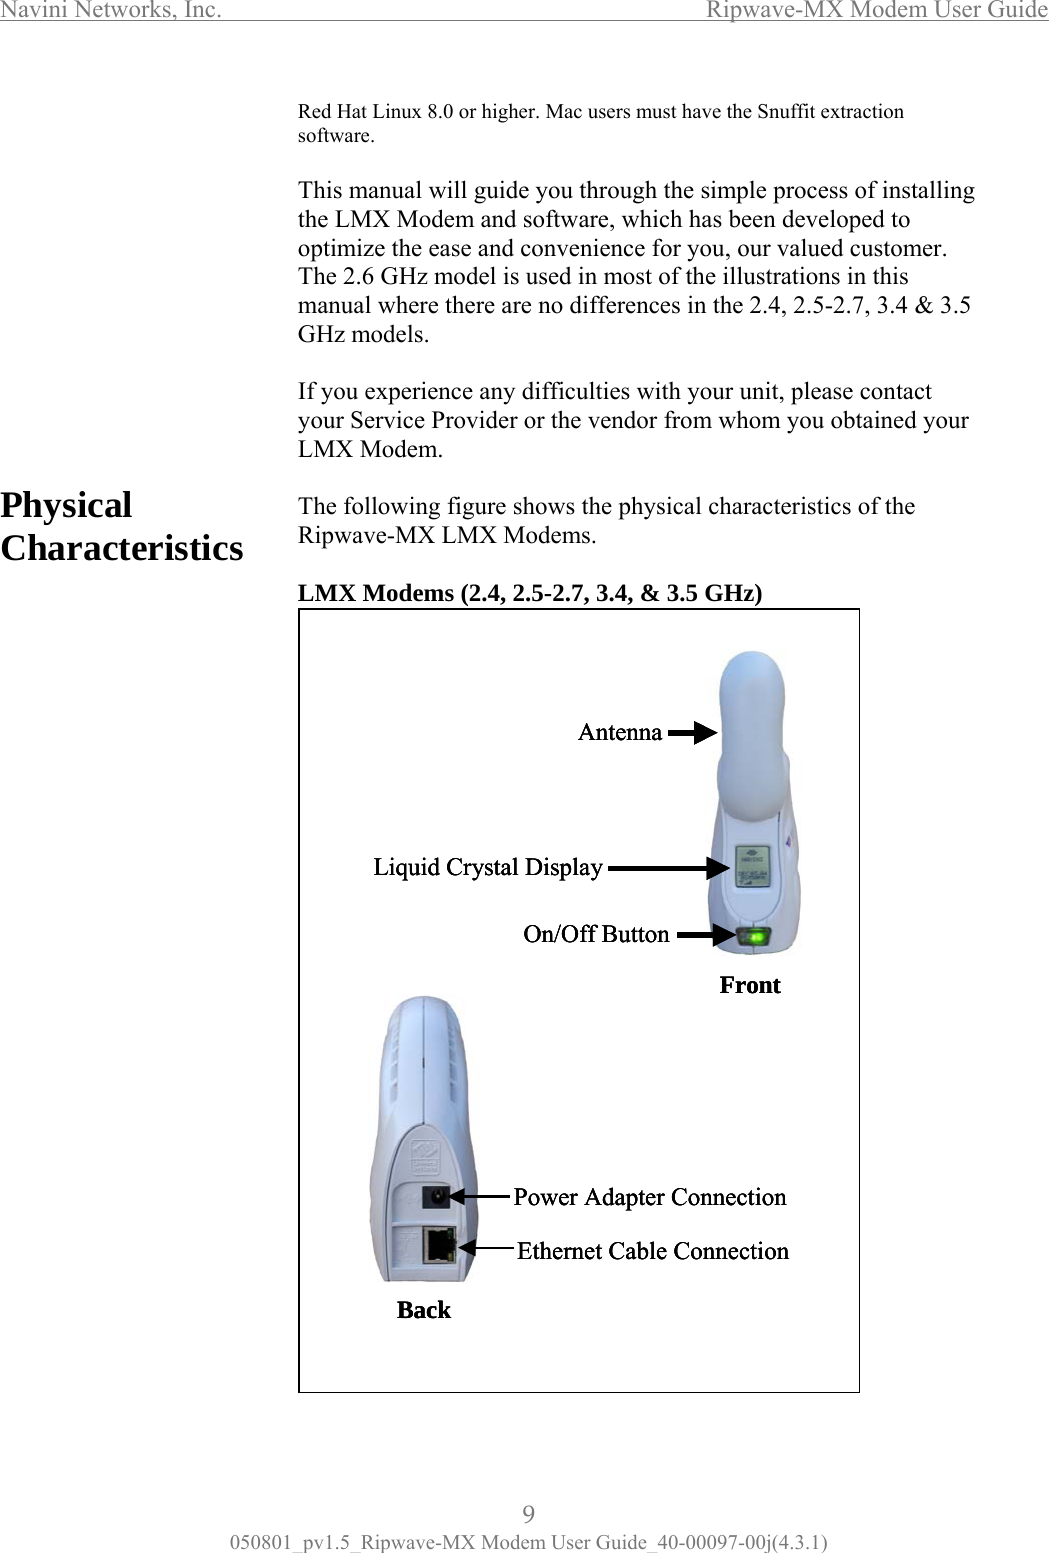 Navini Networks, Inc.                  Ripwave-MX Modem User Guide  hysical haracteristics ed Hat Linux 8.0 or higher. Mac users must have the Snuffit extraction sof T ual  yo roc f installing t X Mo  softw dev d to o e  v alu  T z sed in most of the illustrations in this m her  no  2.5  3.5 G els  you experience any difficulties with your unit, please contact ur e  Ripodems (2.4, 2.5-2.7, 3.4, &amp; 3.5 GHz)                PC                                   Rtware.  his manhe LMwill guide dem andu through the simple pare, which has been ess oelopeptimize thHease and con enience for you, our v ed customer.he 2.6 Ganual w model is ue there are  differences in the 2.4, -2.7, 3.4 &amp;Hz mod .  Ifyour Service Provider or the vendor from whom you obtained yoLMX Modem.  Th  following figure shows the physical characteristics of thewave-MX LMX Modems.  LMX M Front AntennaLiquid Crystal DisplayOn/Off ButtonBackPower Adapter ConnectionEthernet Cable ConnectionFront AntennaLiquid Crystal DisplayOn/Off ButtonFront AntennaLiquid Crystal DisplayOn/Off ButtonBackPower Adapter ConnectionEthernet Cable ConnectionBackPower Adapter ConnectionEthernet Cable Connection9 050801_pv1.5_Ripwave-MX Modem User Guide_40-00097-00j(4.3.1) 